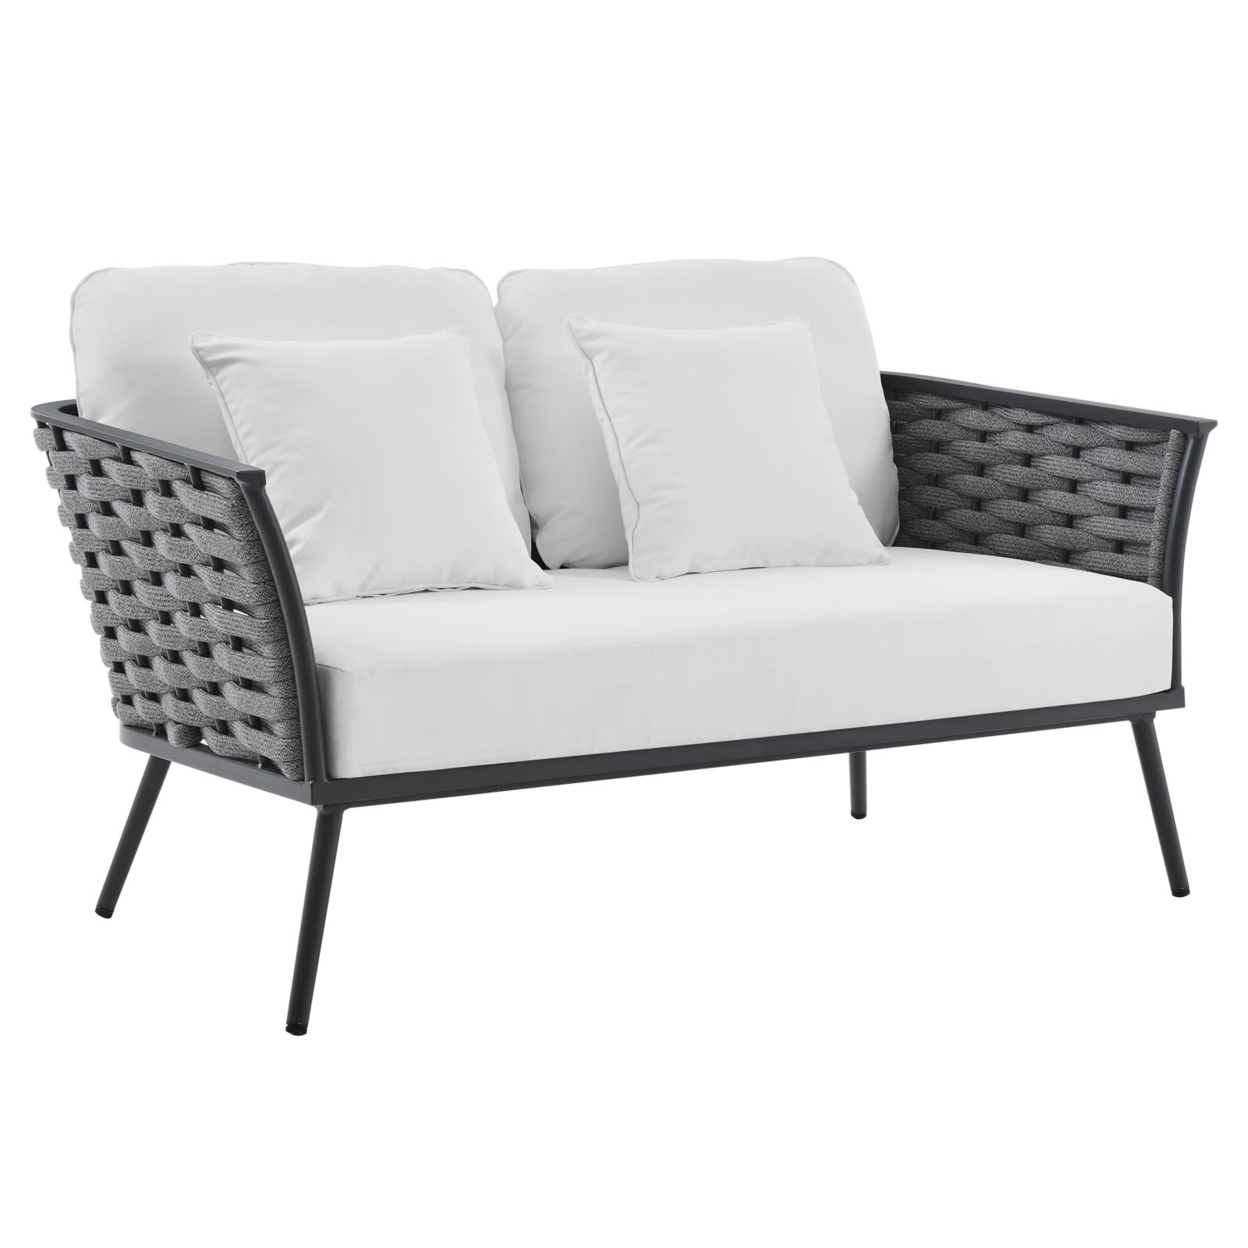 Modway Stance Aluminum & Fabric Patio Loveseat in Gra & White - image 1 of 8